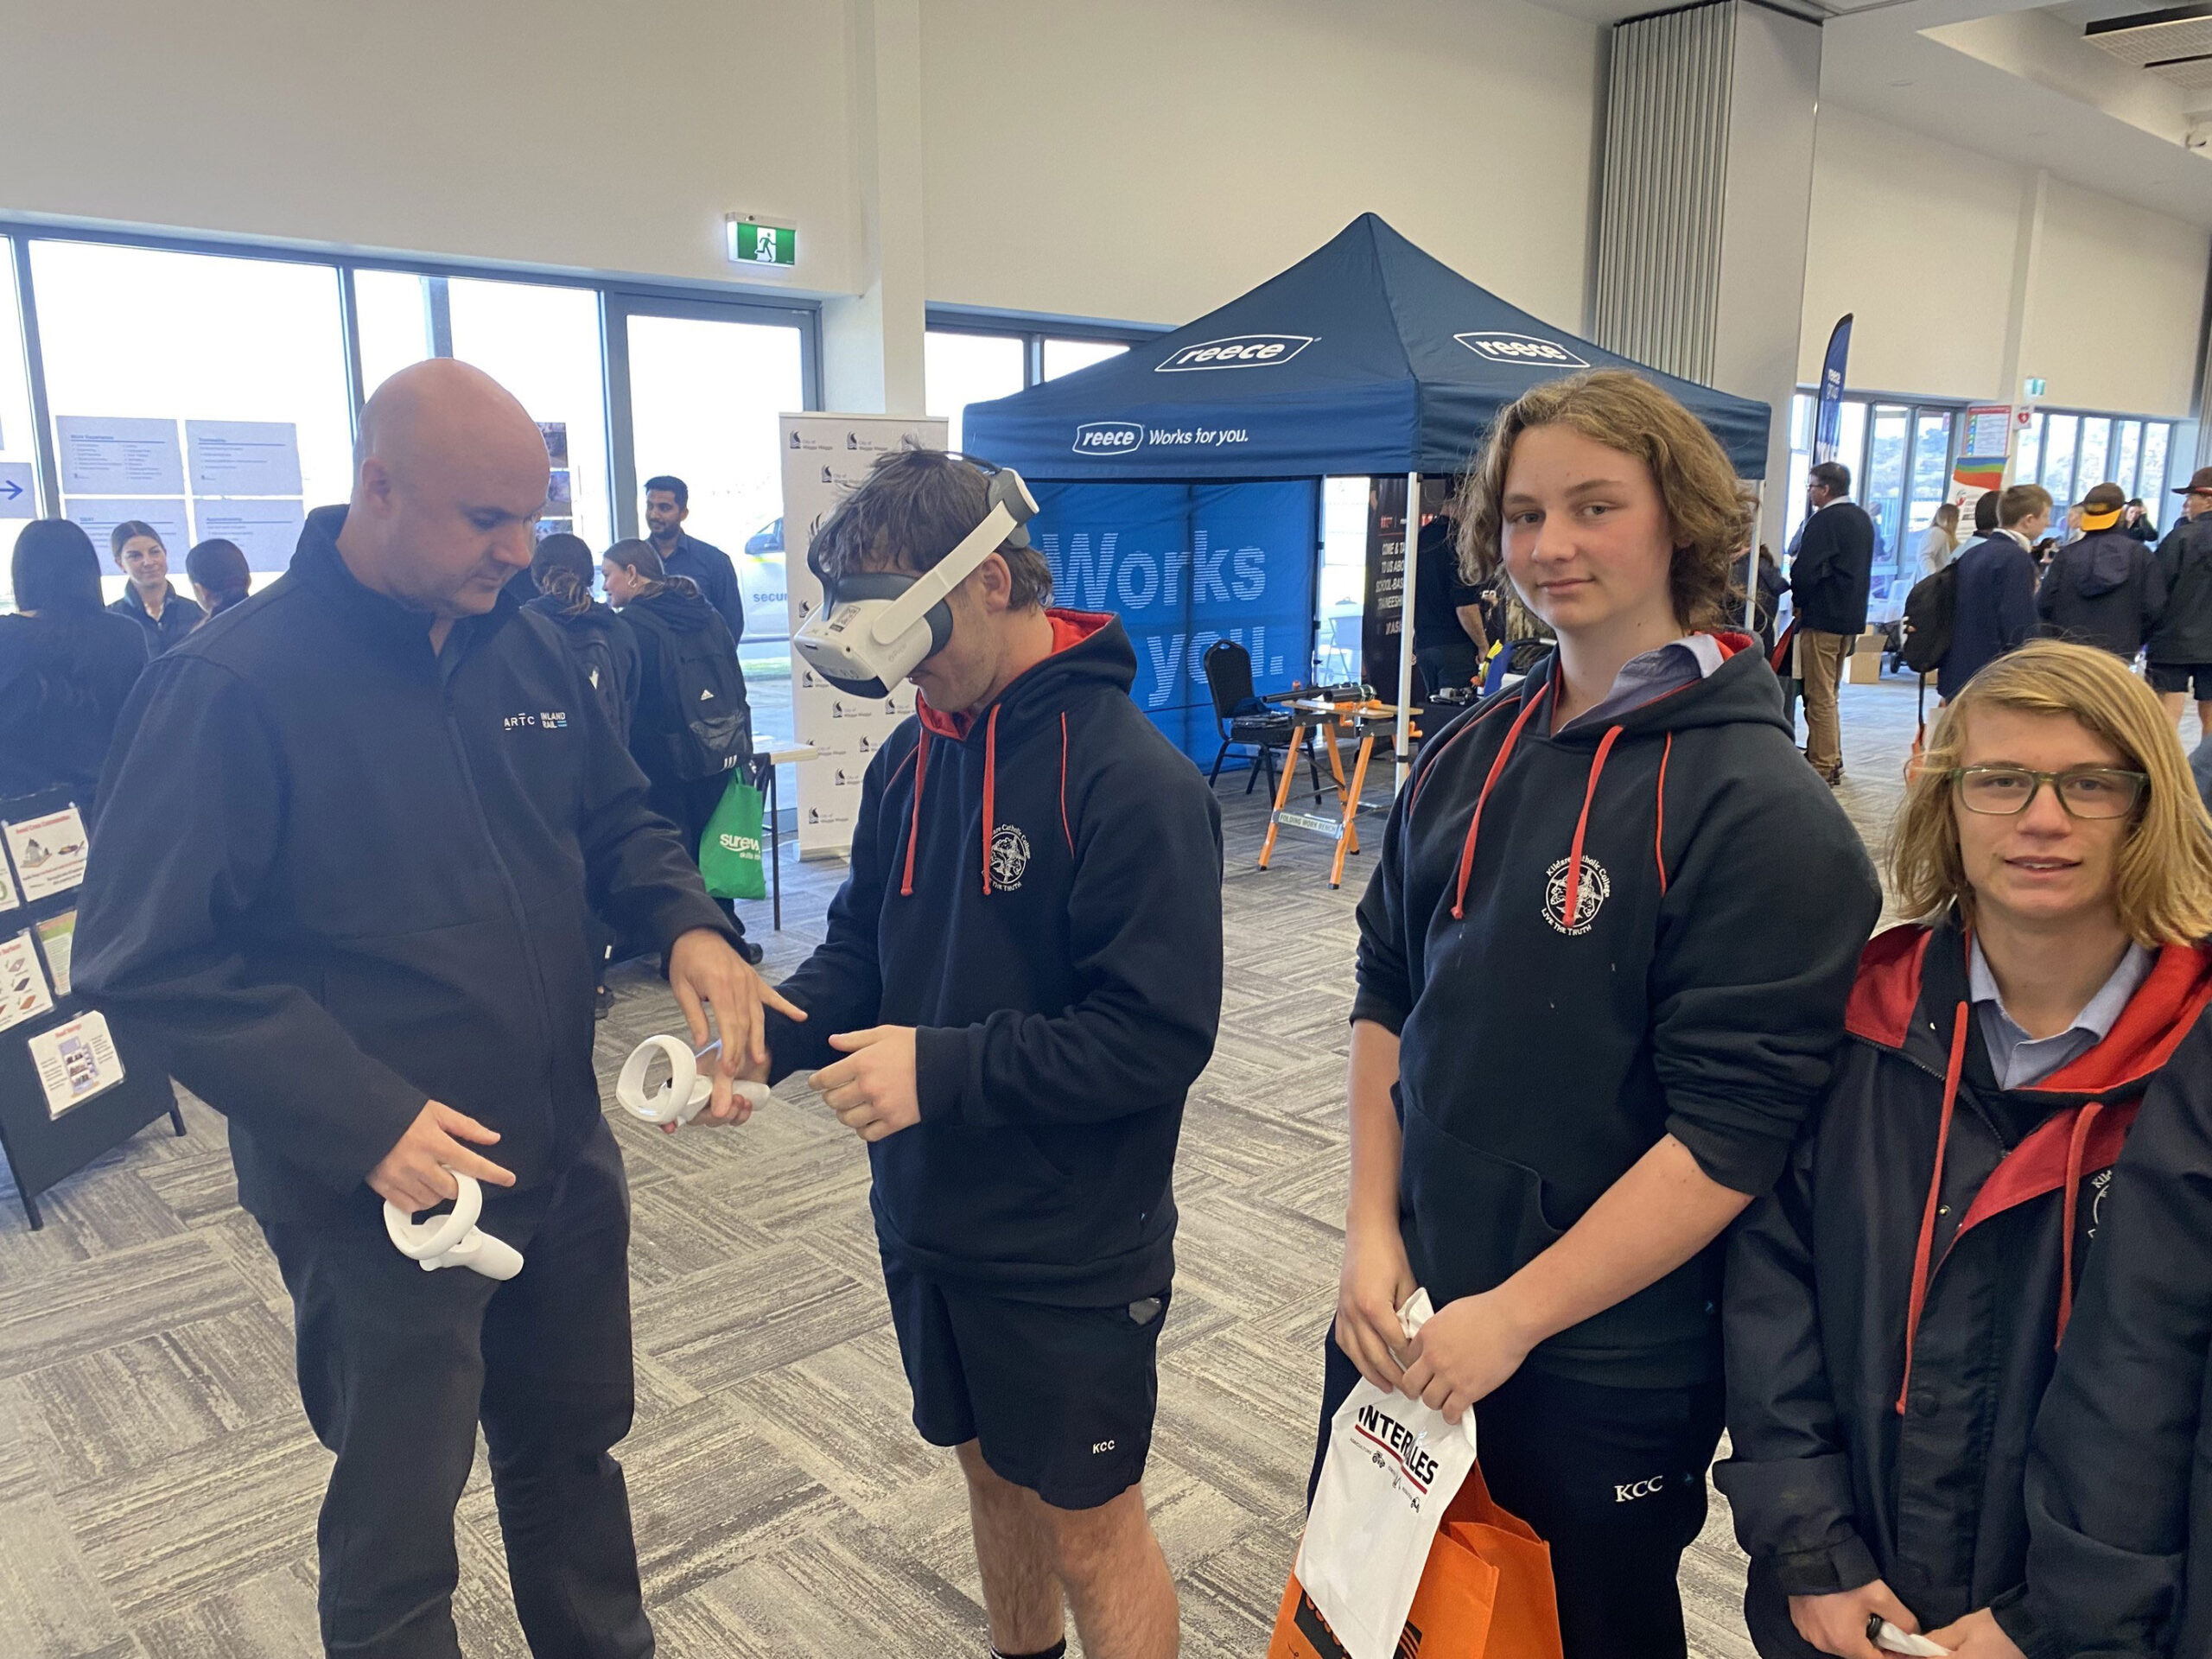 Students at the Wodonga Jobs Expo testing out the virtual reality headset at the Inland Rail stand